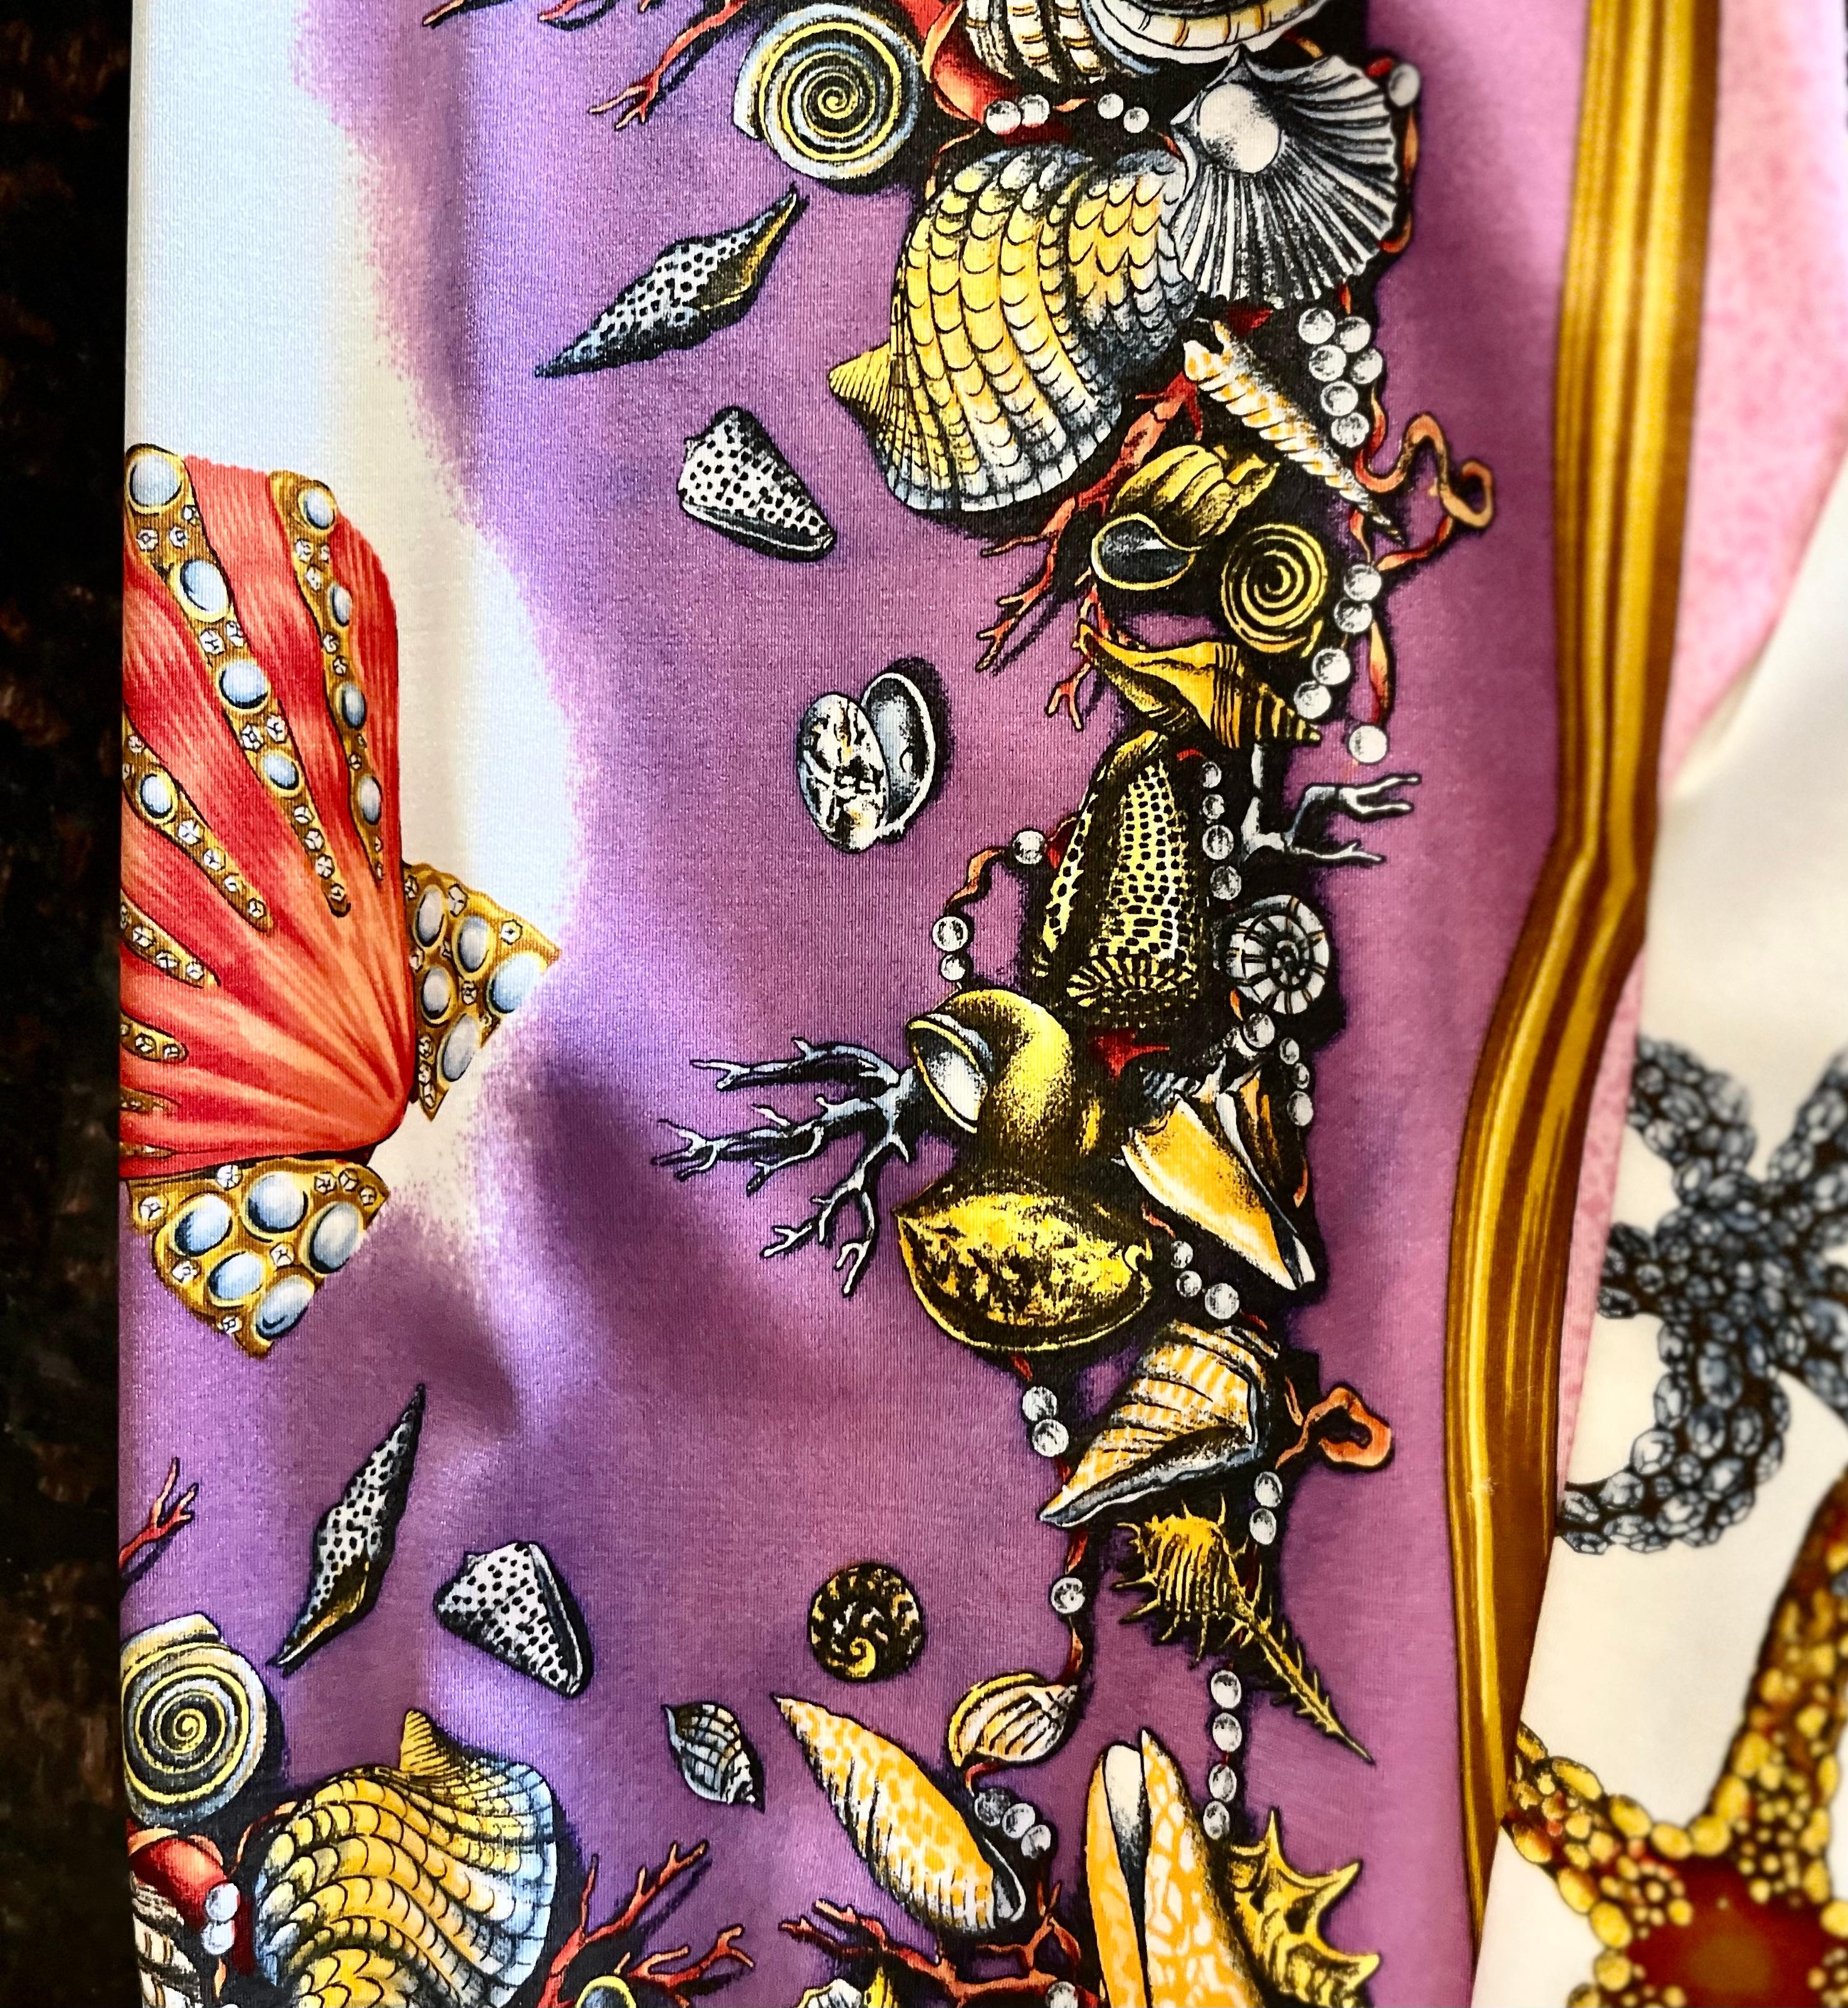 SEASHELL LEGGINGS from MIAMI MANSION GIANNI VERSACE PERSONAL COLLECTION For Sale 1